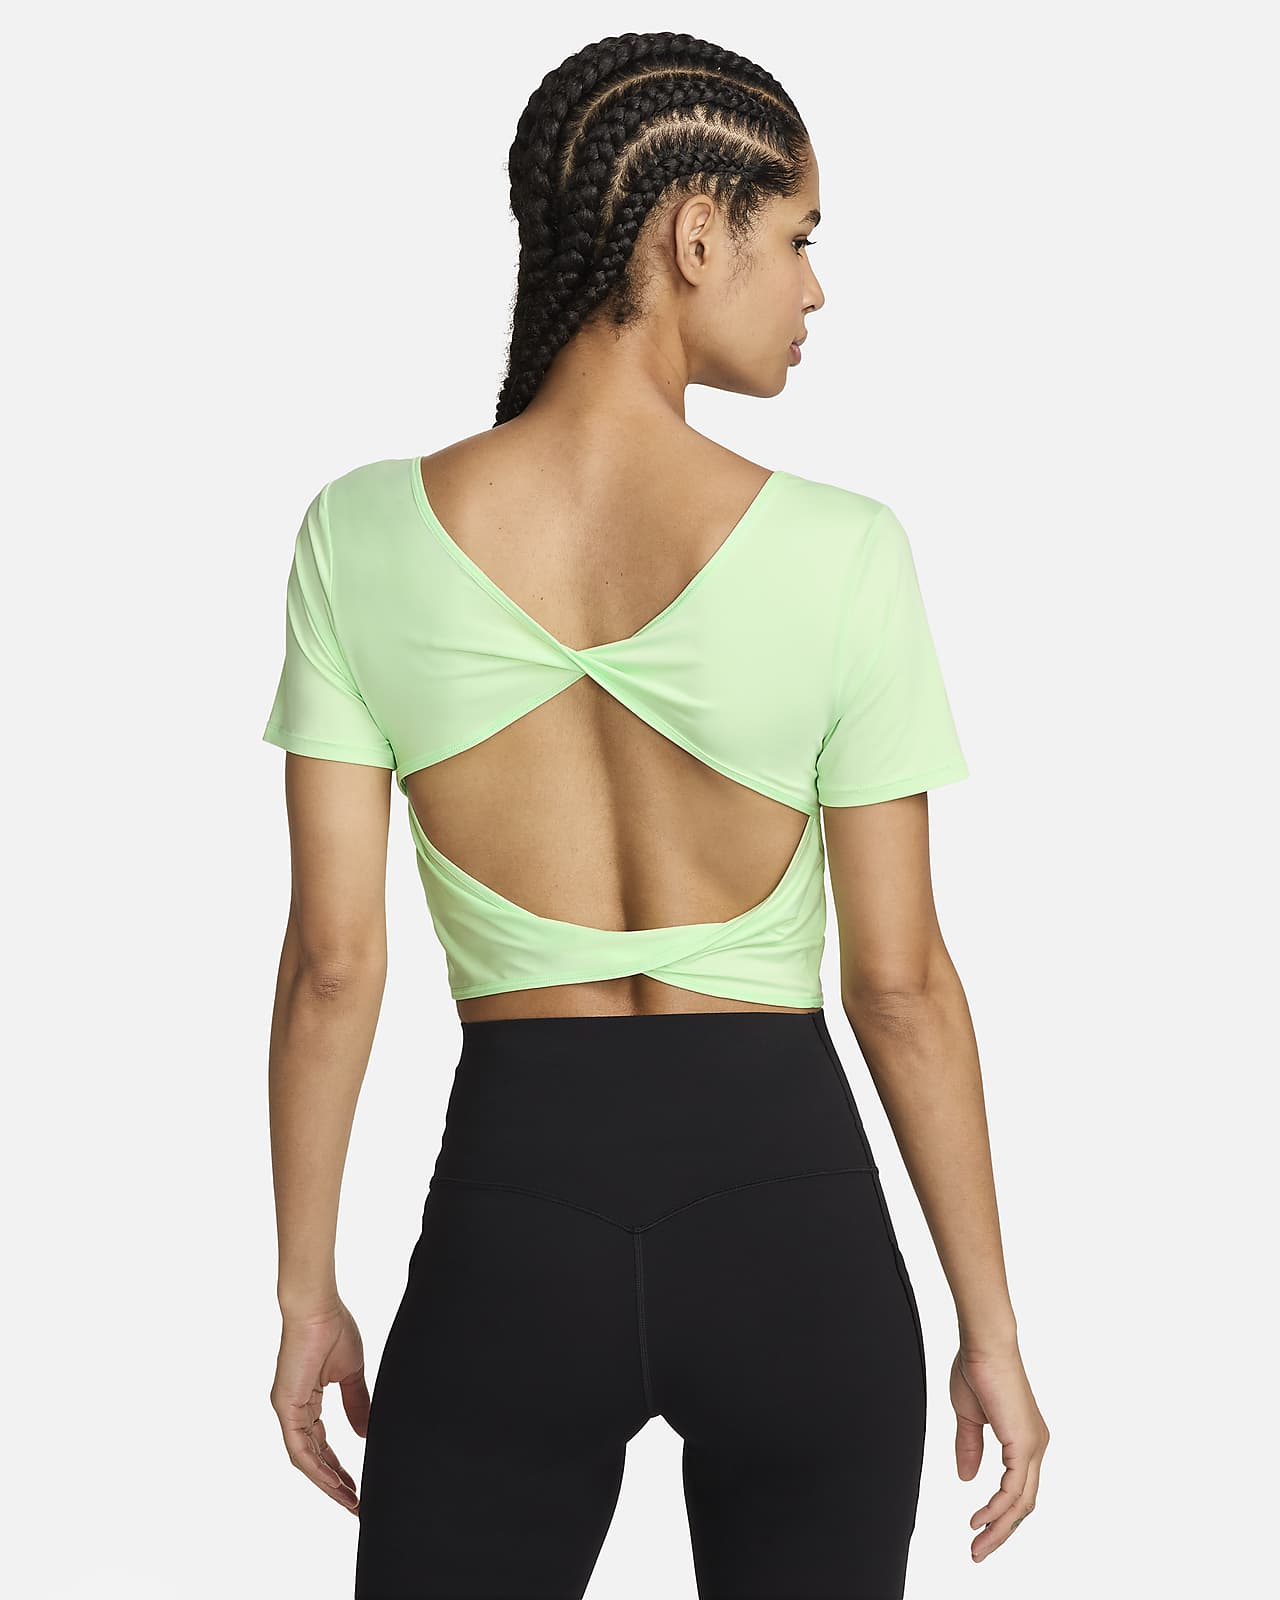 Nike One Classic Women's Dri-FIT Short-Sleeve Cropped Top.